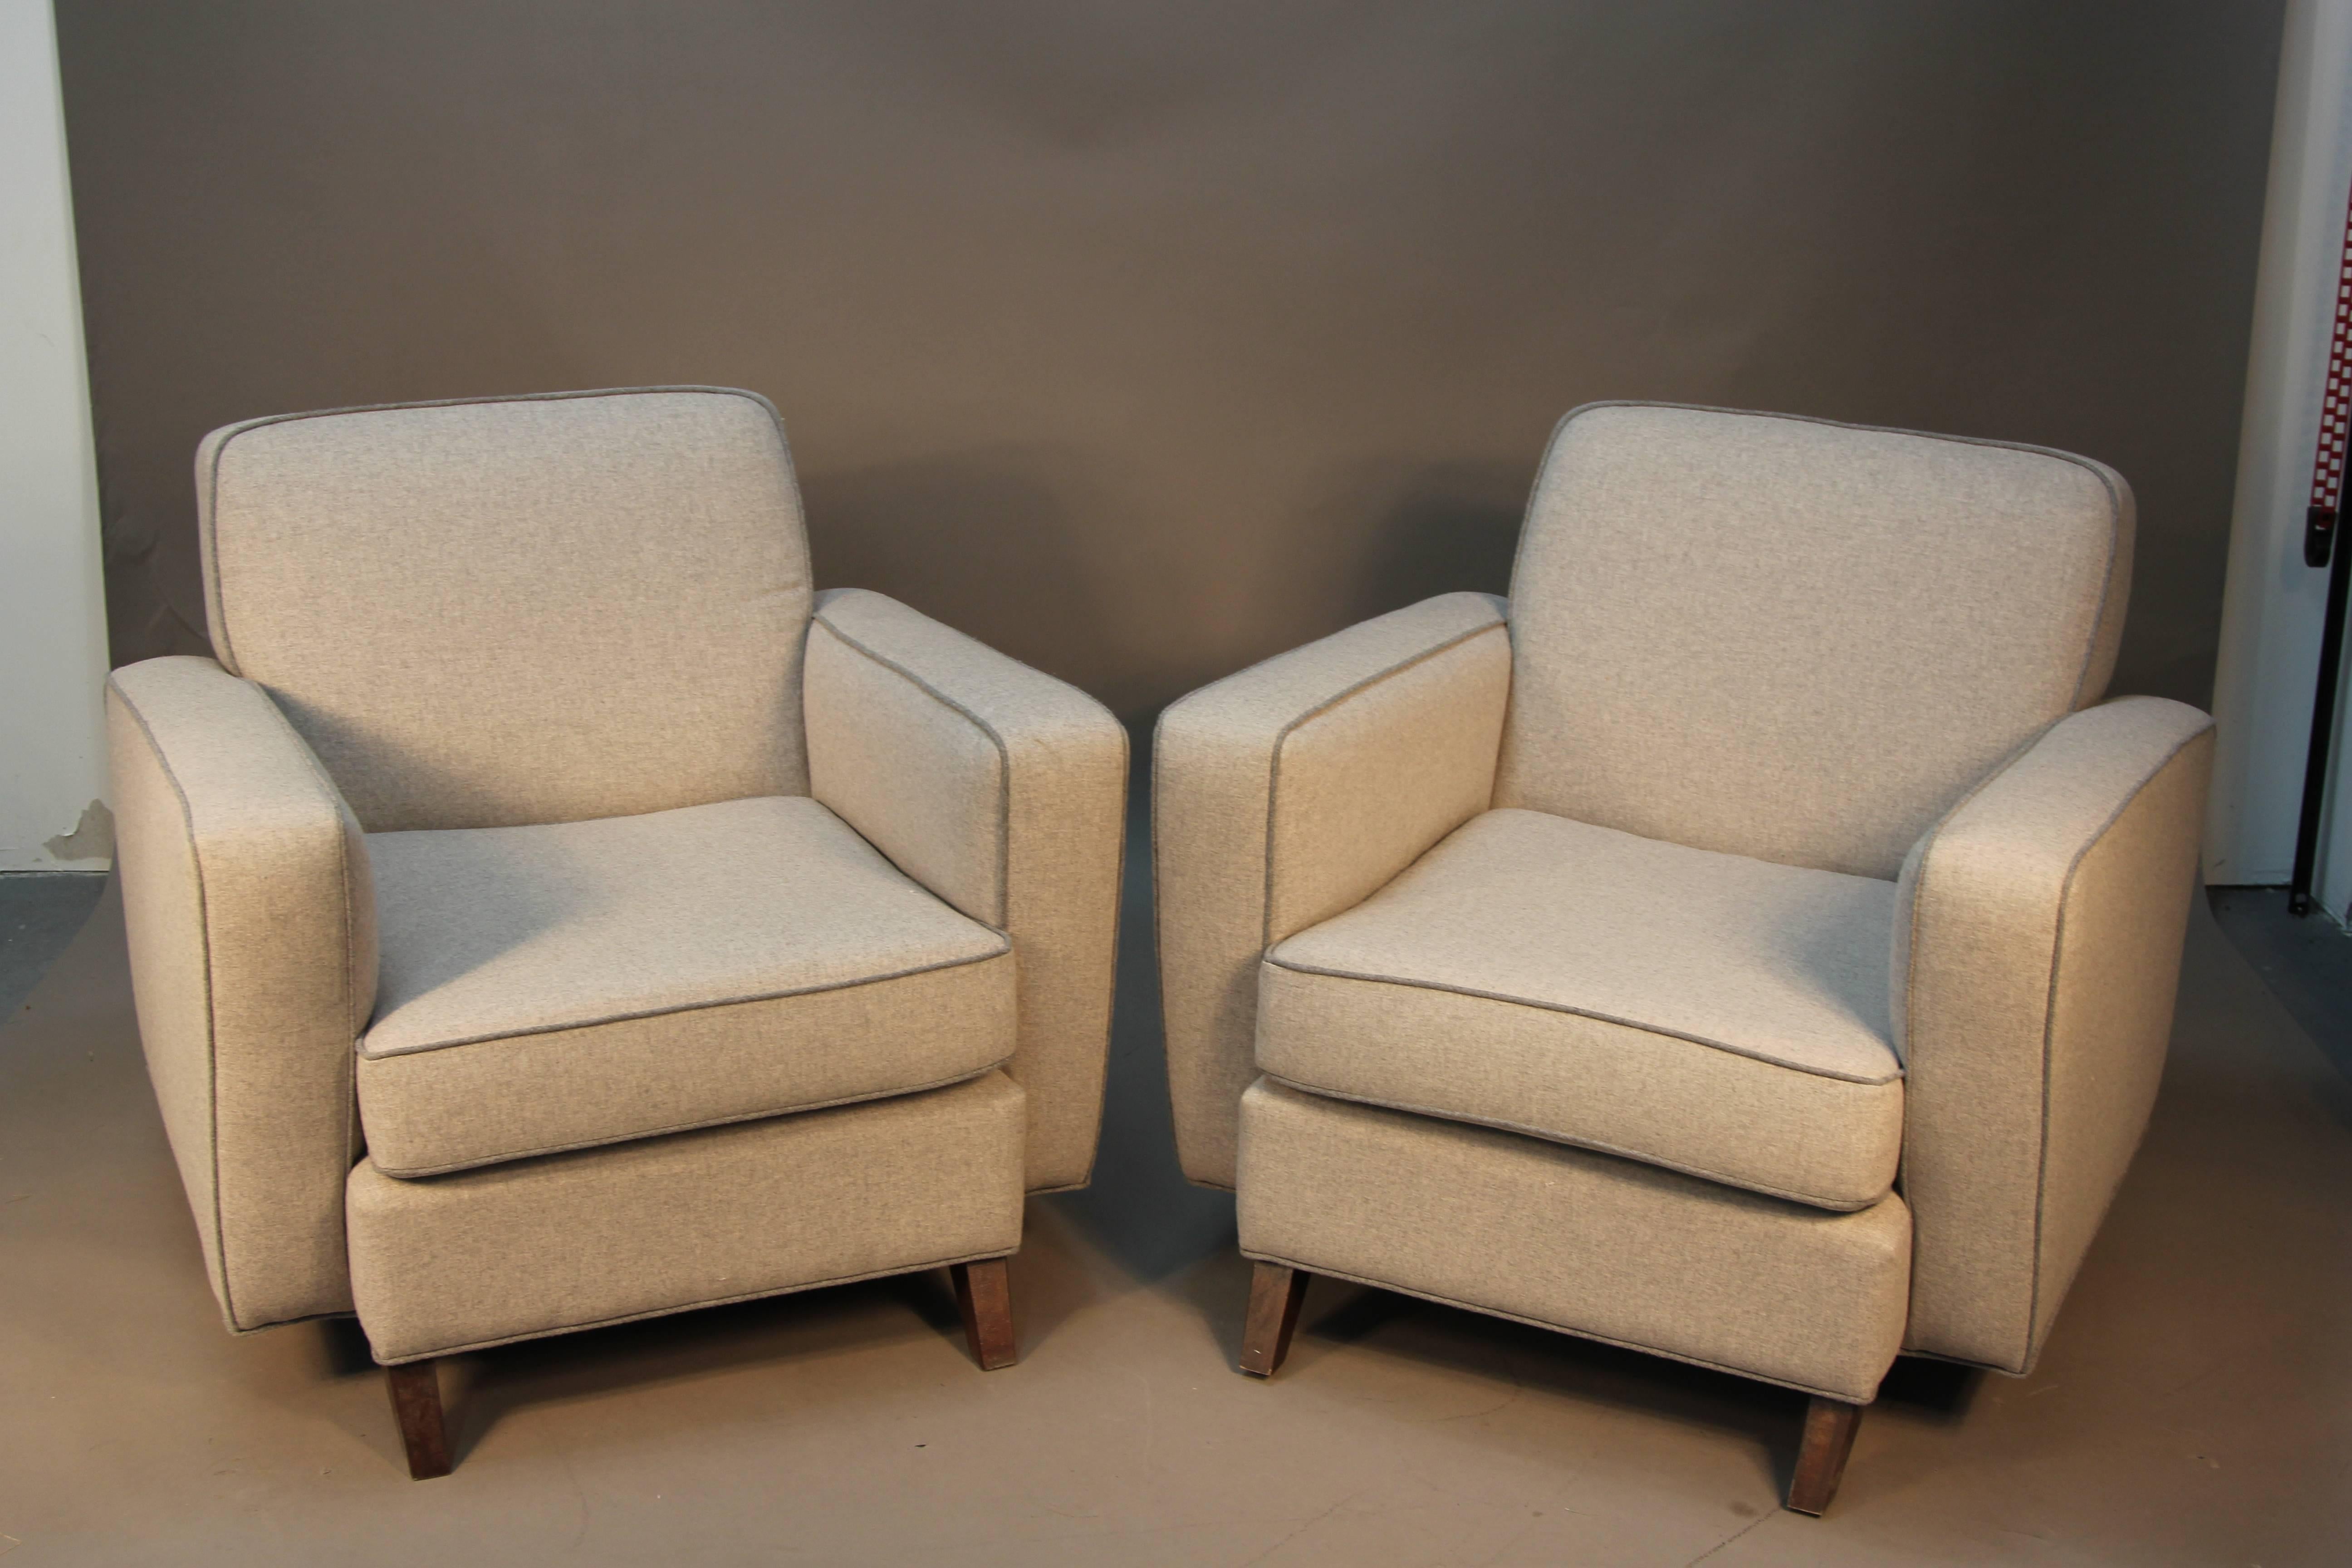 Beautifully re-upholstered in grey wool with dark grey piping, this set of Mid-Century Modern club chairs have an Art Deco feel with the high angular arms. Very comfortable to sit in, nice wood detail feet.